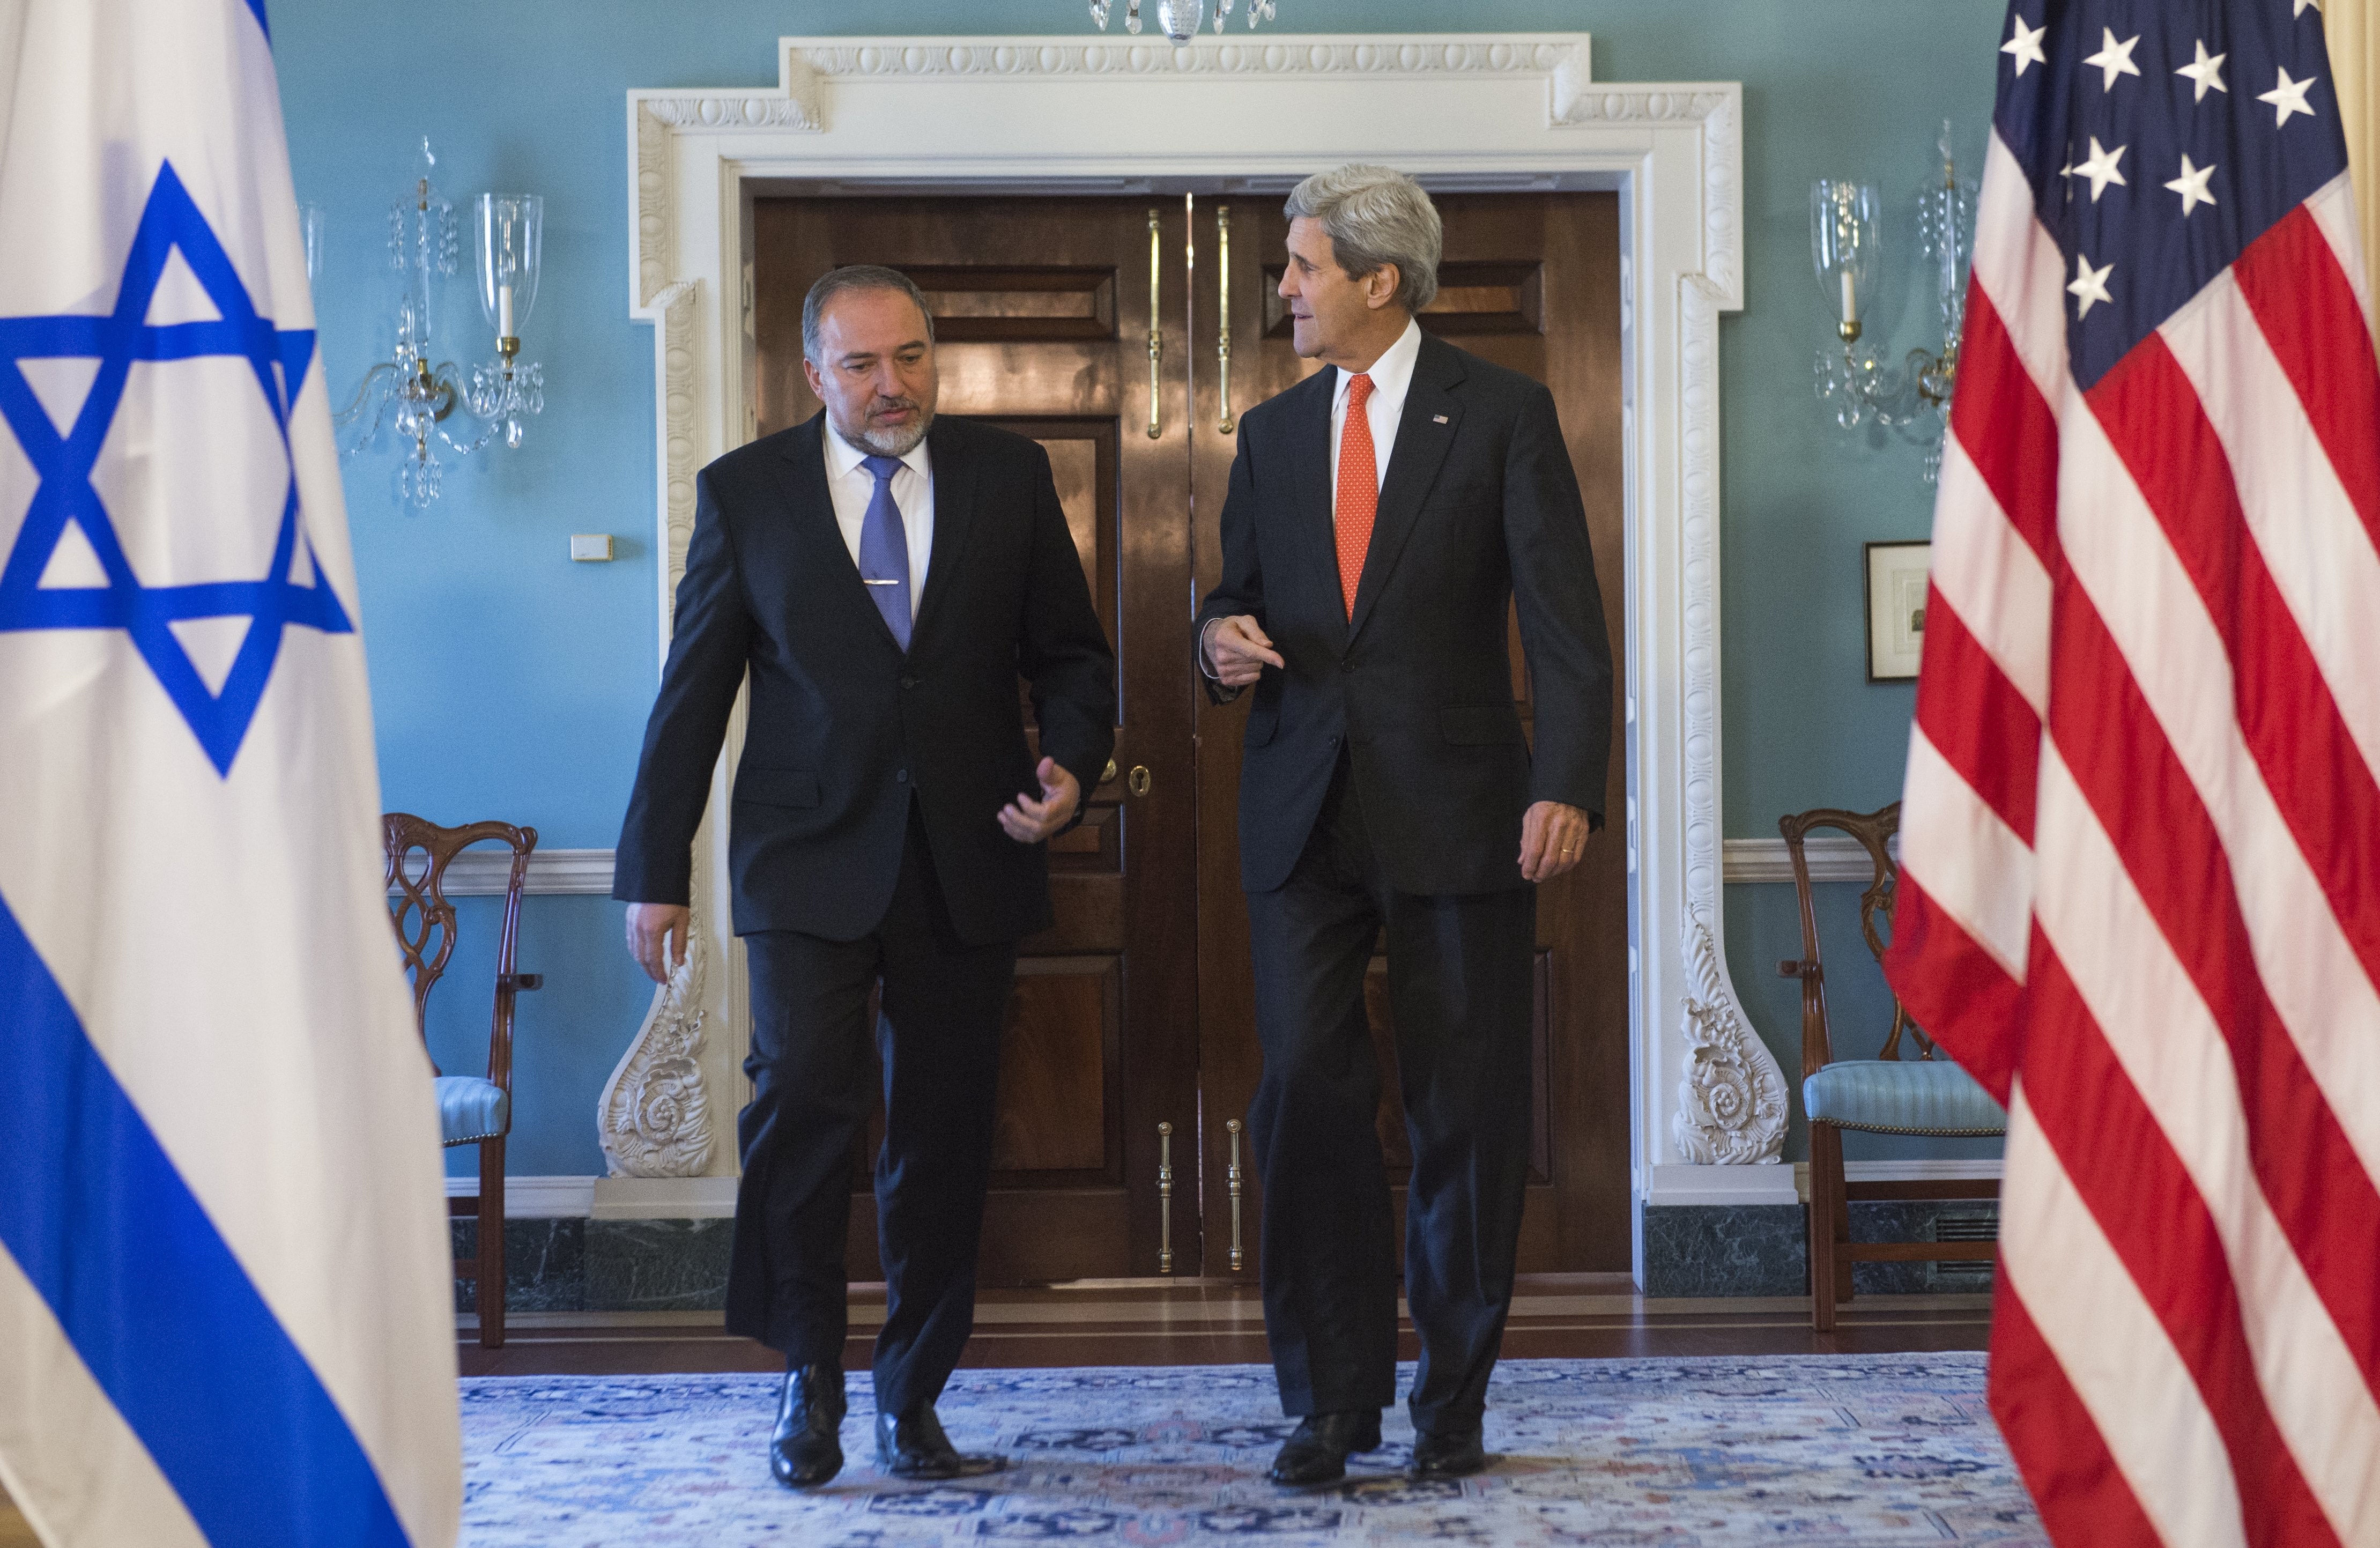 U.S. Secretary of State John Kerry and Israeli Foreign Minister Avigdor Lieberman (L) arrive to speak to the media prior to meetings at the State Department in Washington, DC, April 9, 2014. (SAUL LOEB—AFP/Getty Images)